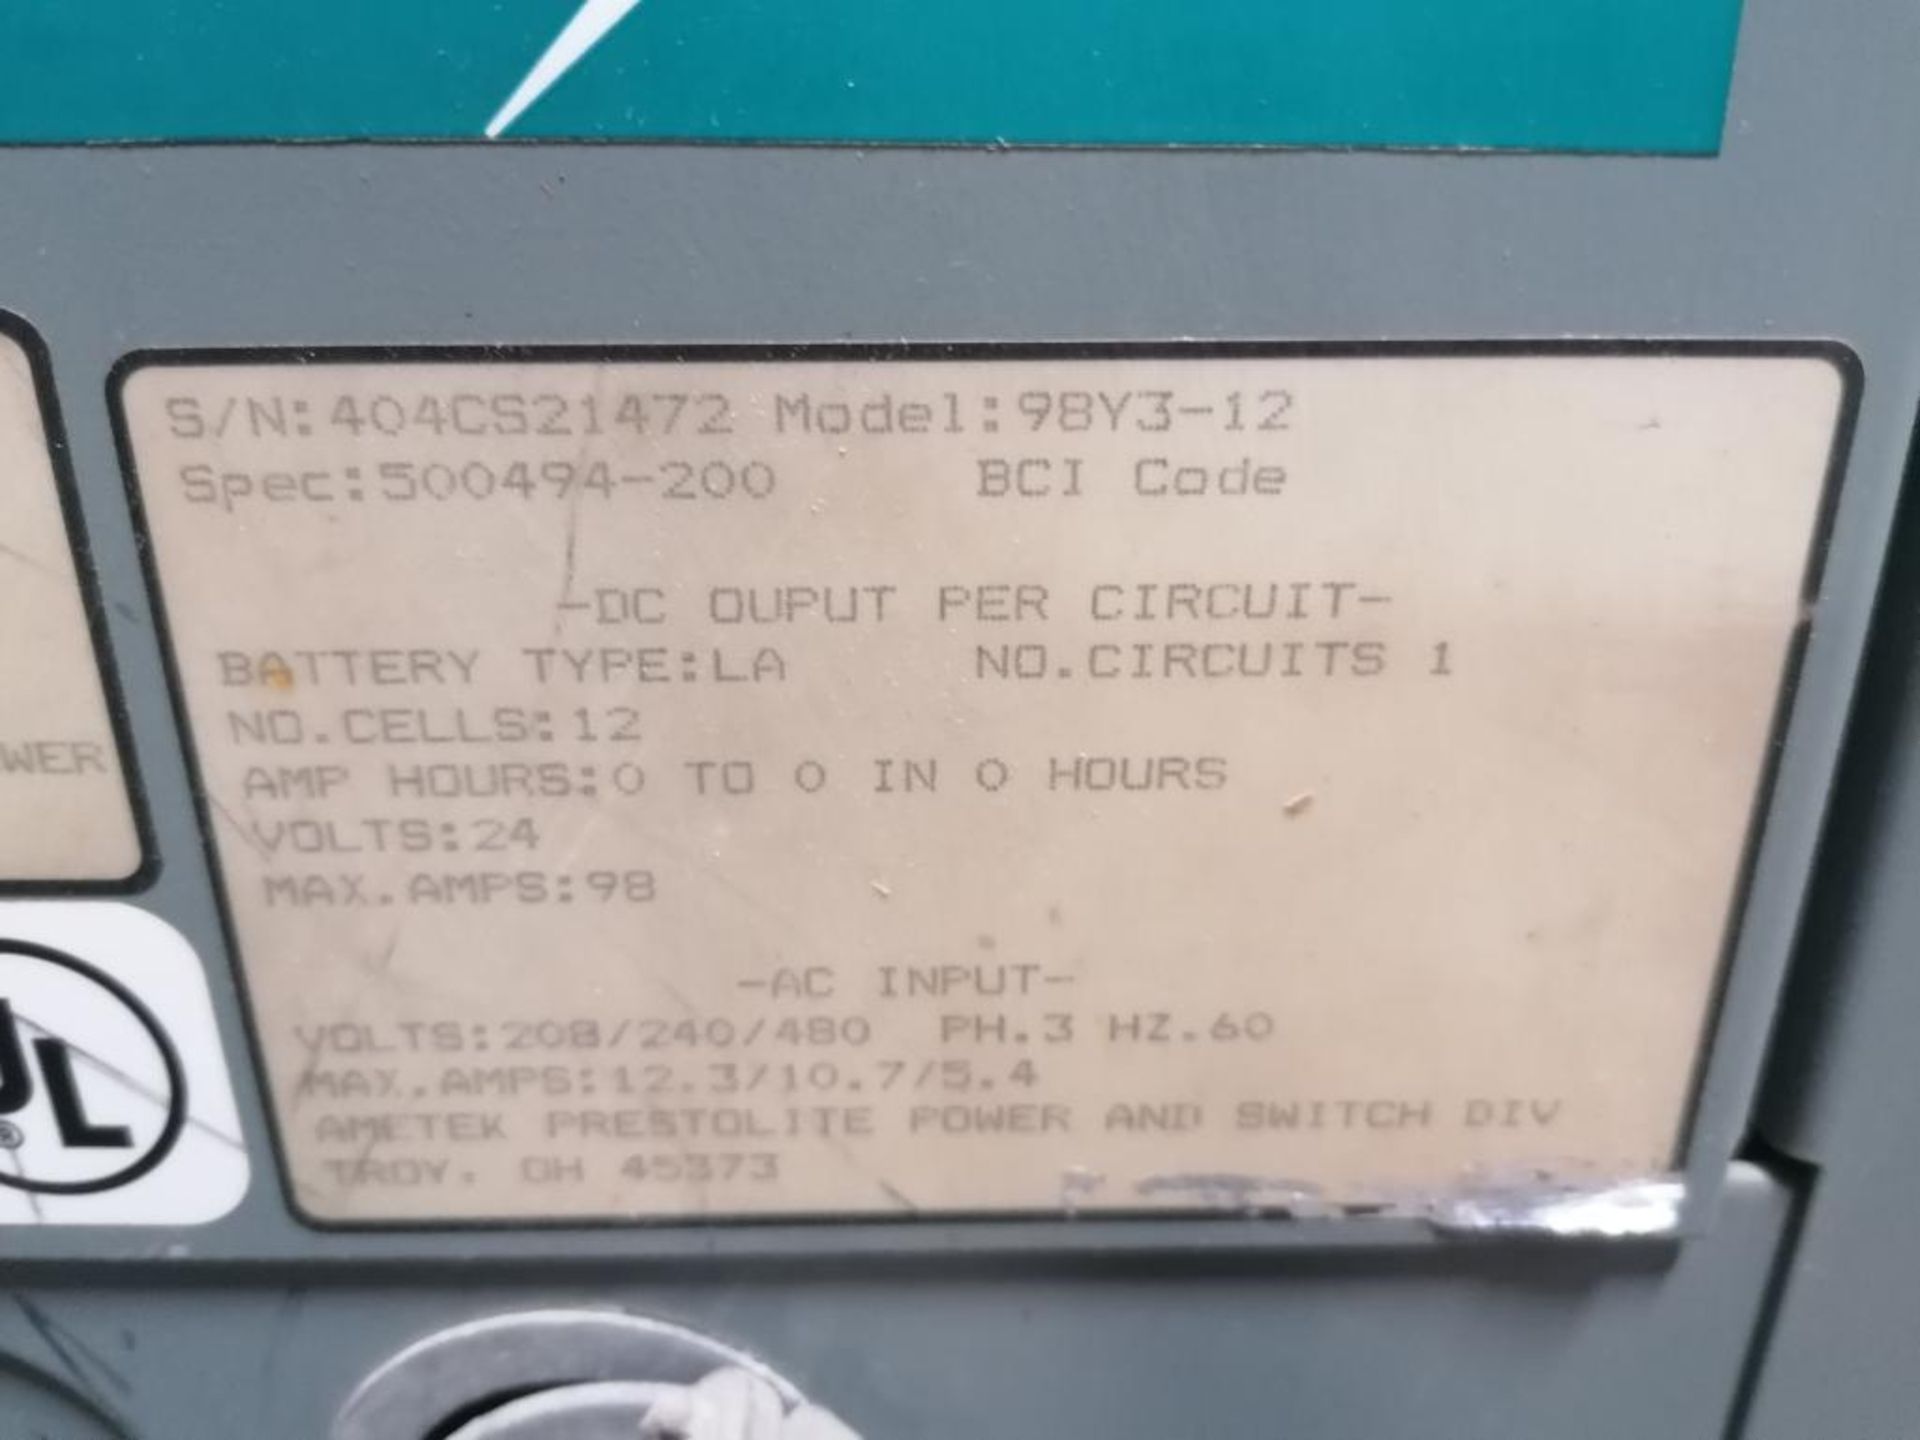 (4) PowerStar SCR1000 Industrial Forklift Battery Charger, Model 98Y3-12, Serial #404CS21472, Serial - Image 6 of 19